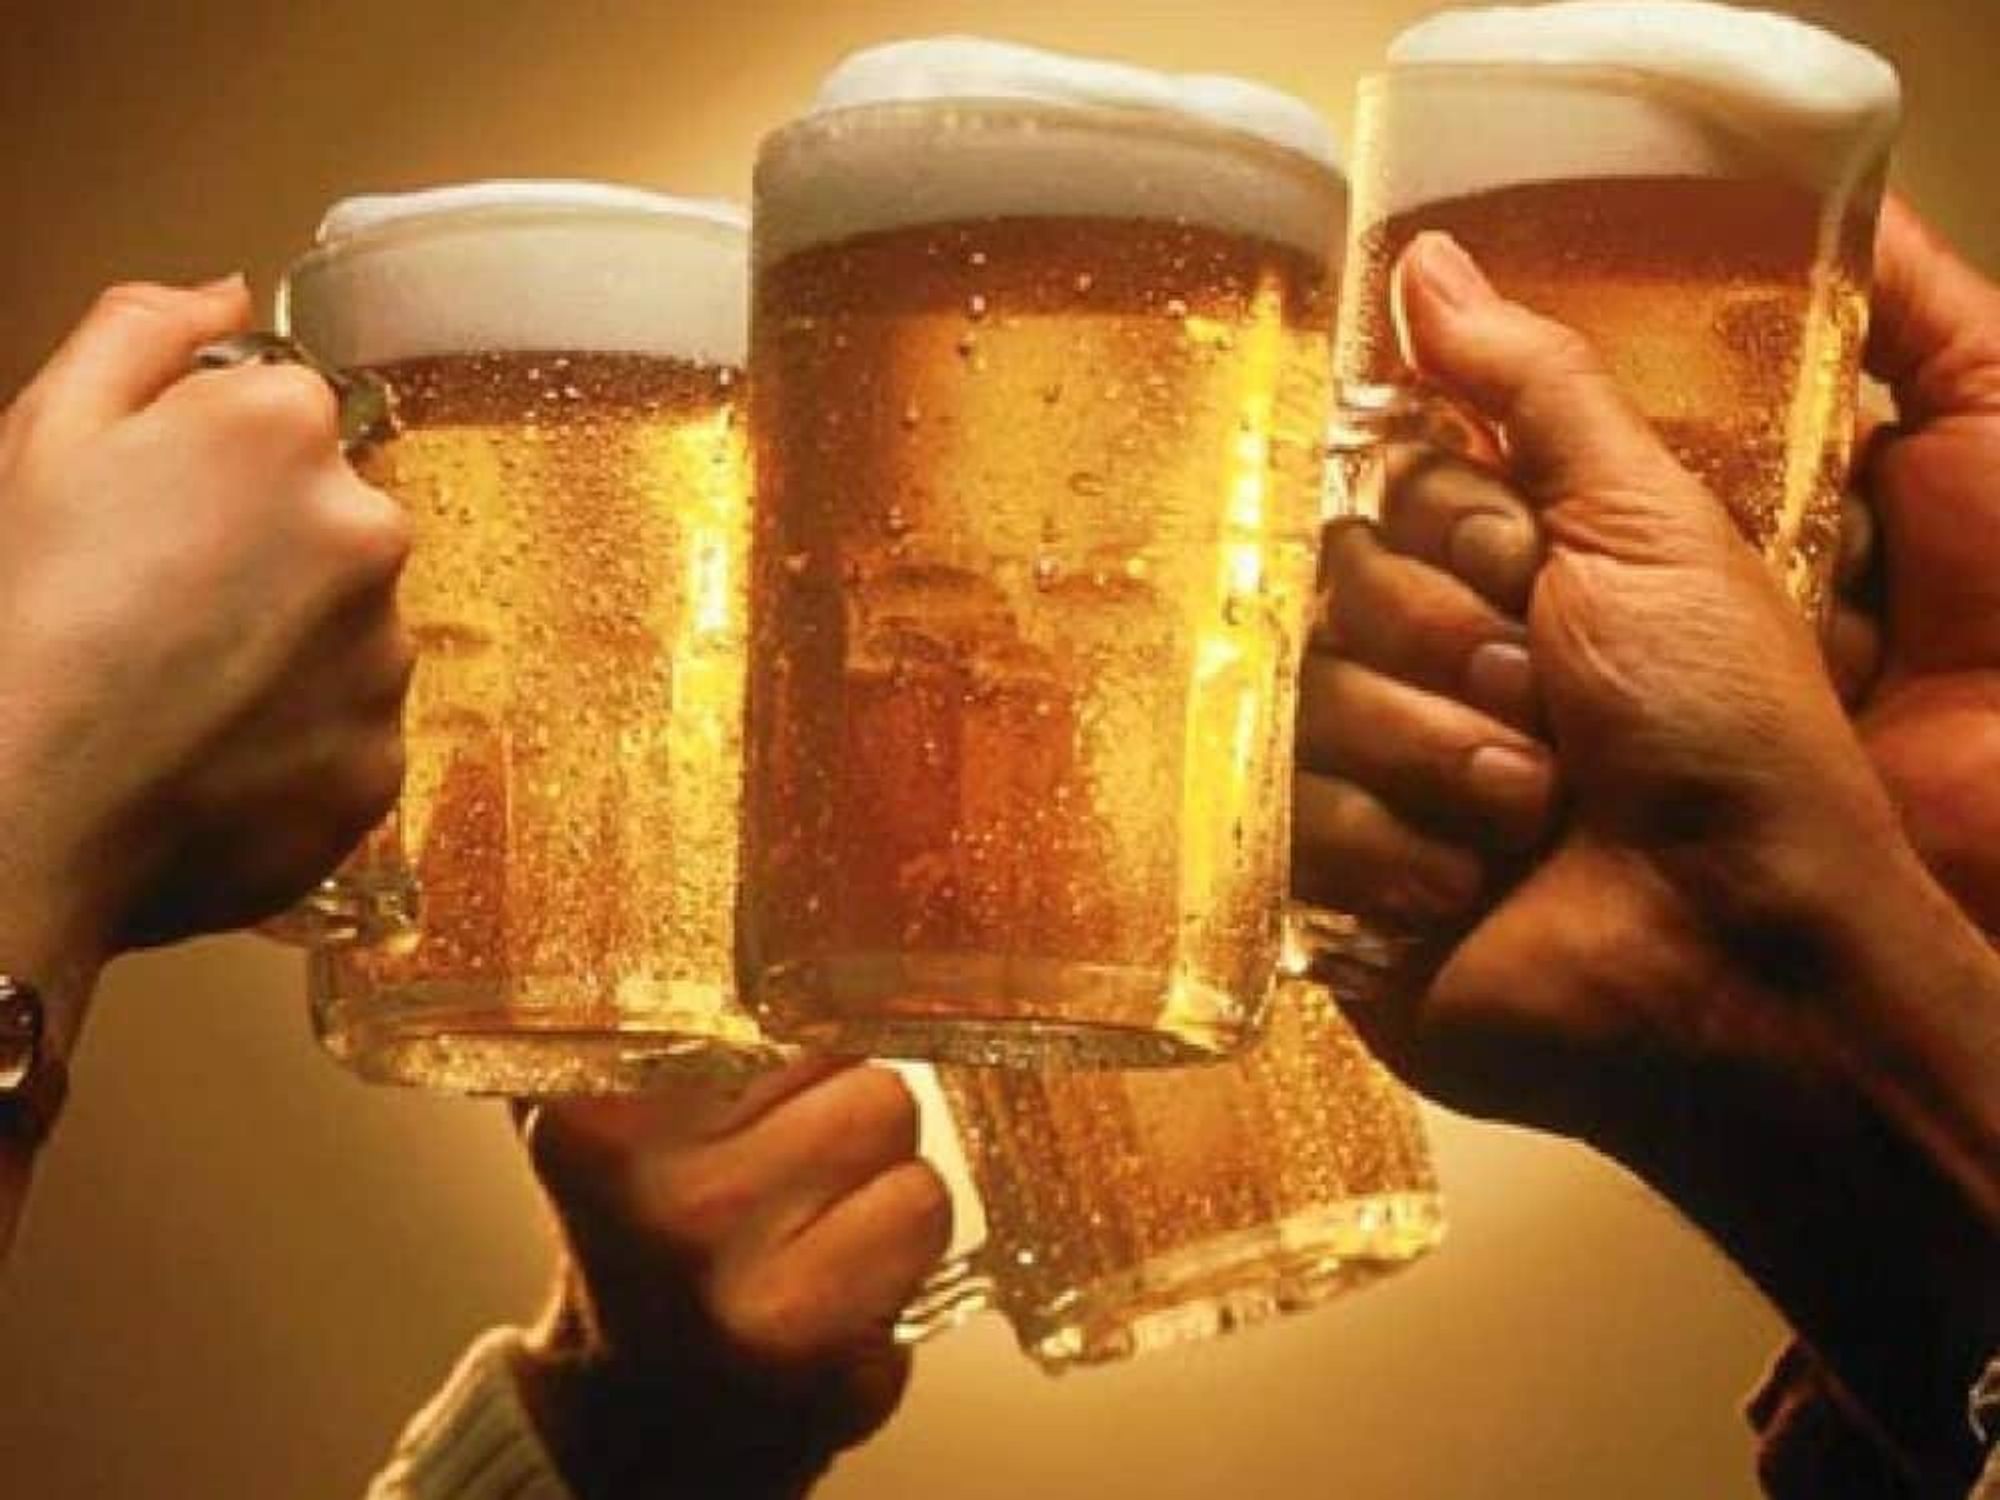 hands toasting with beer mugs